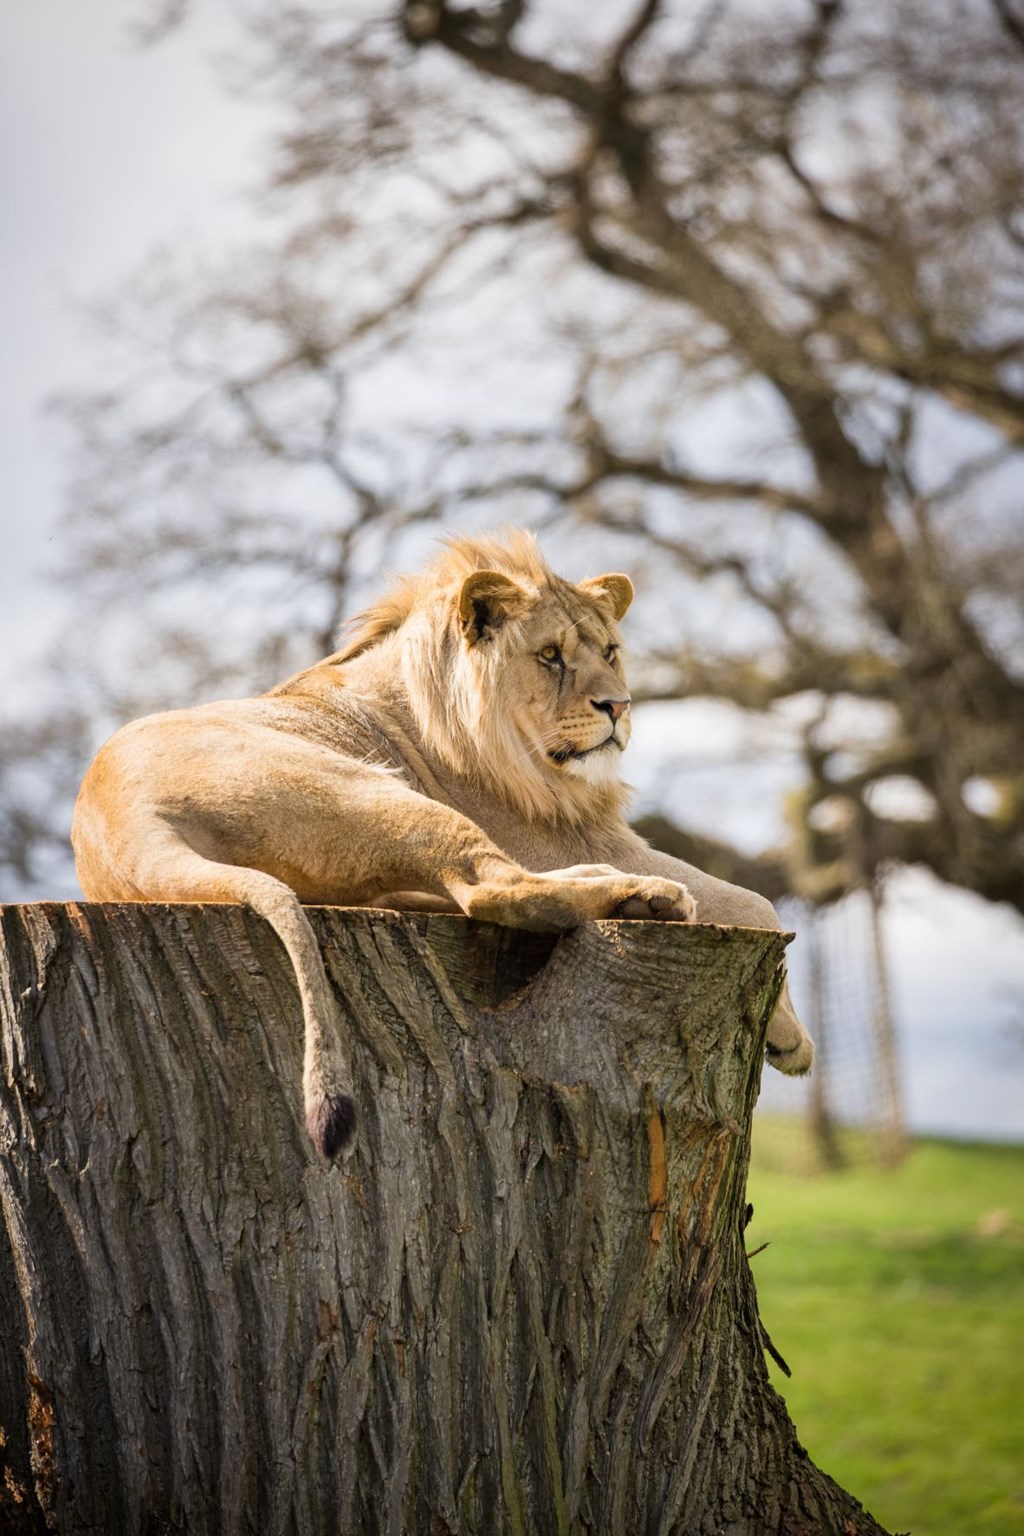 Young male lion rests on tree stump in grassy enclosure with trees